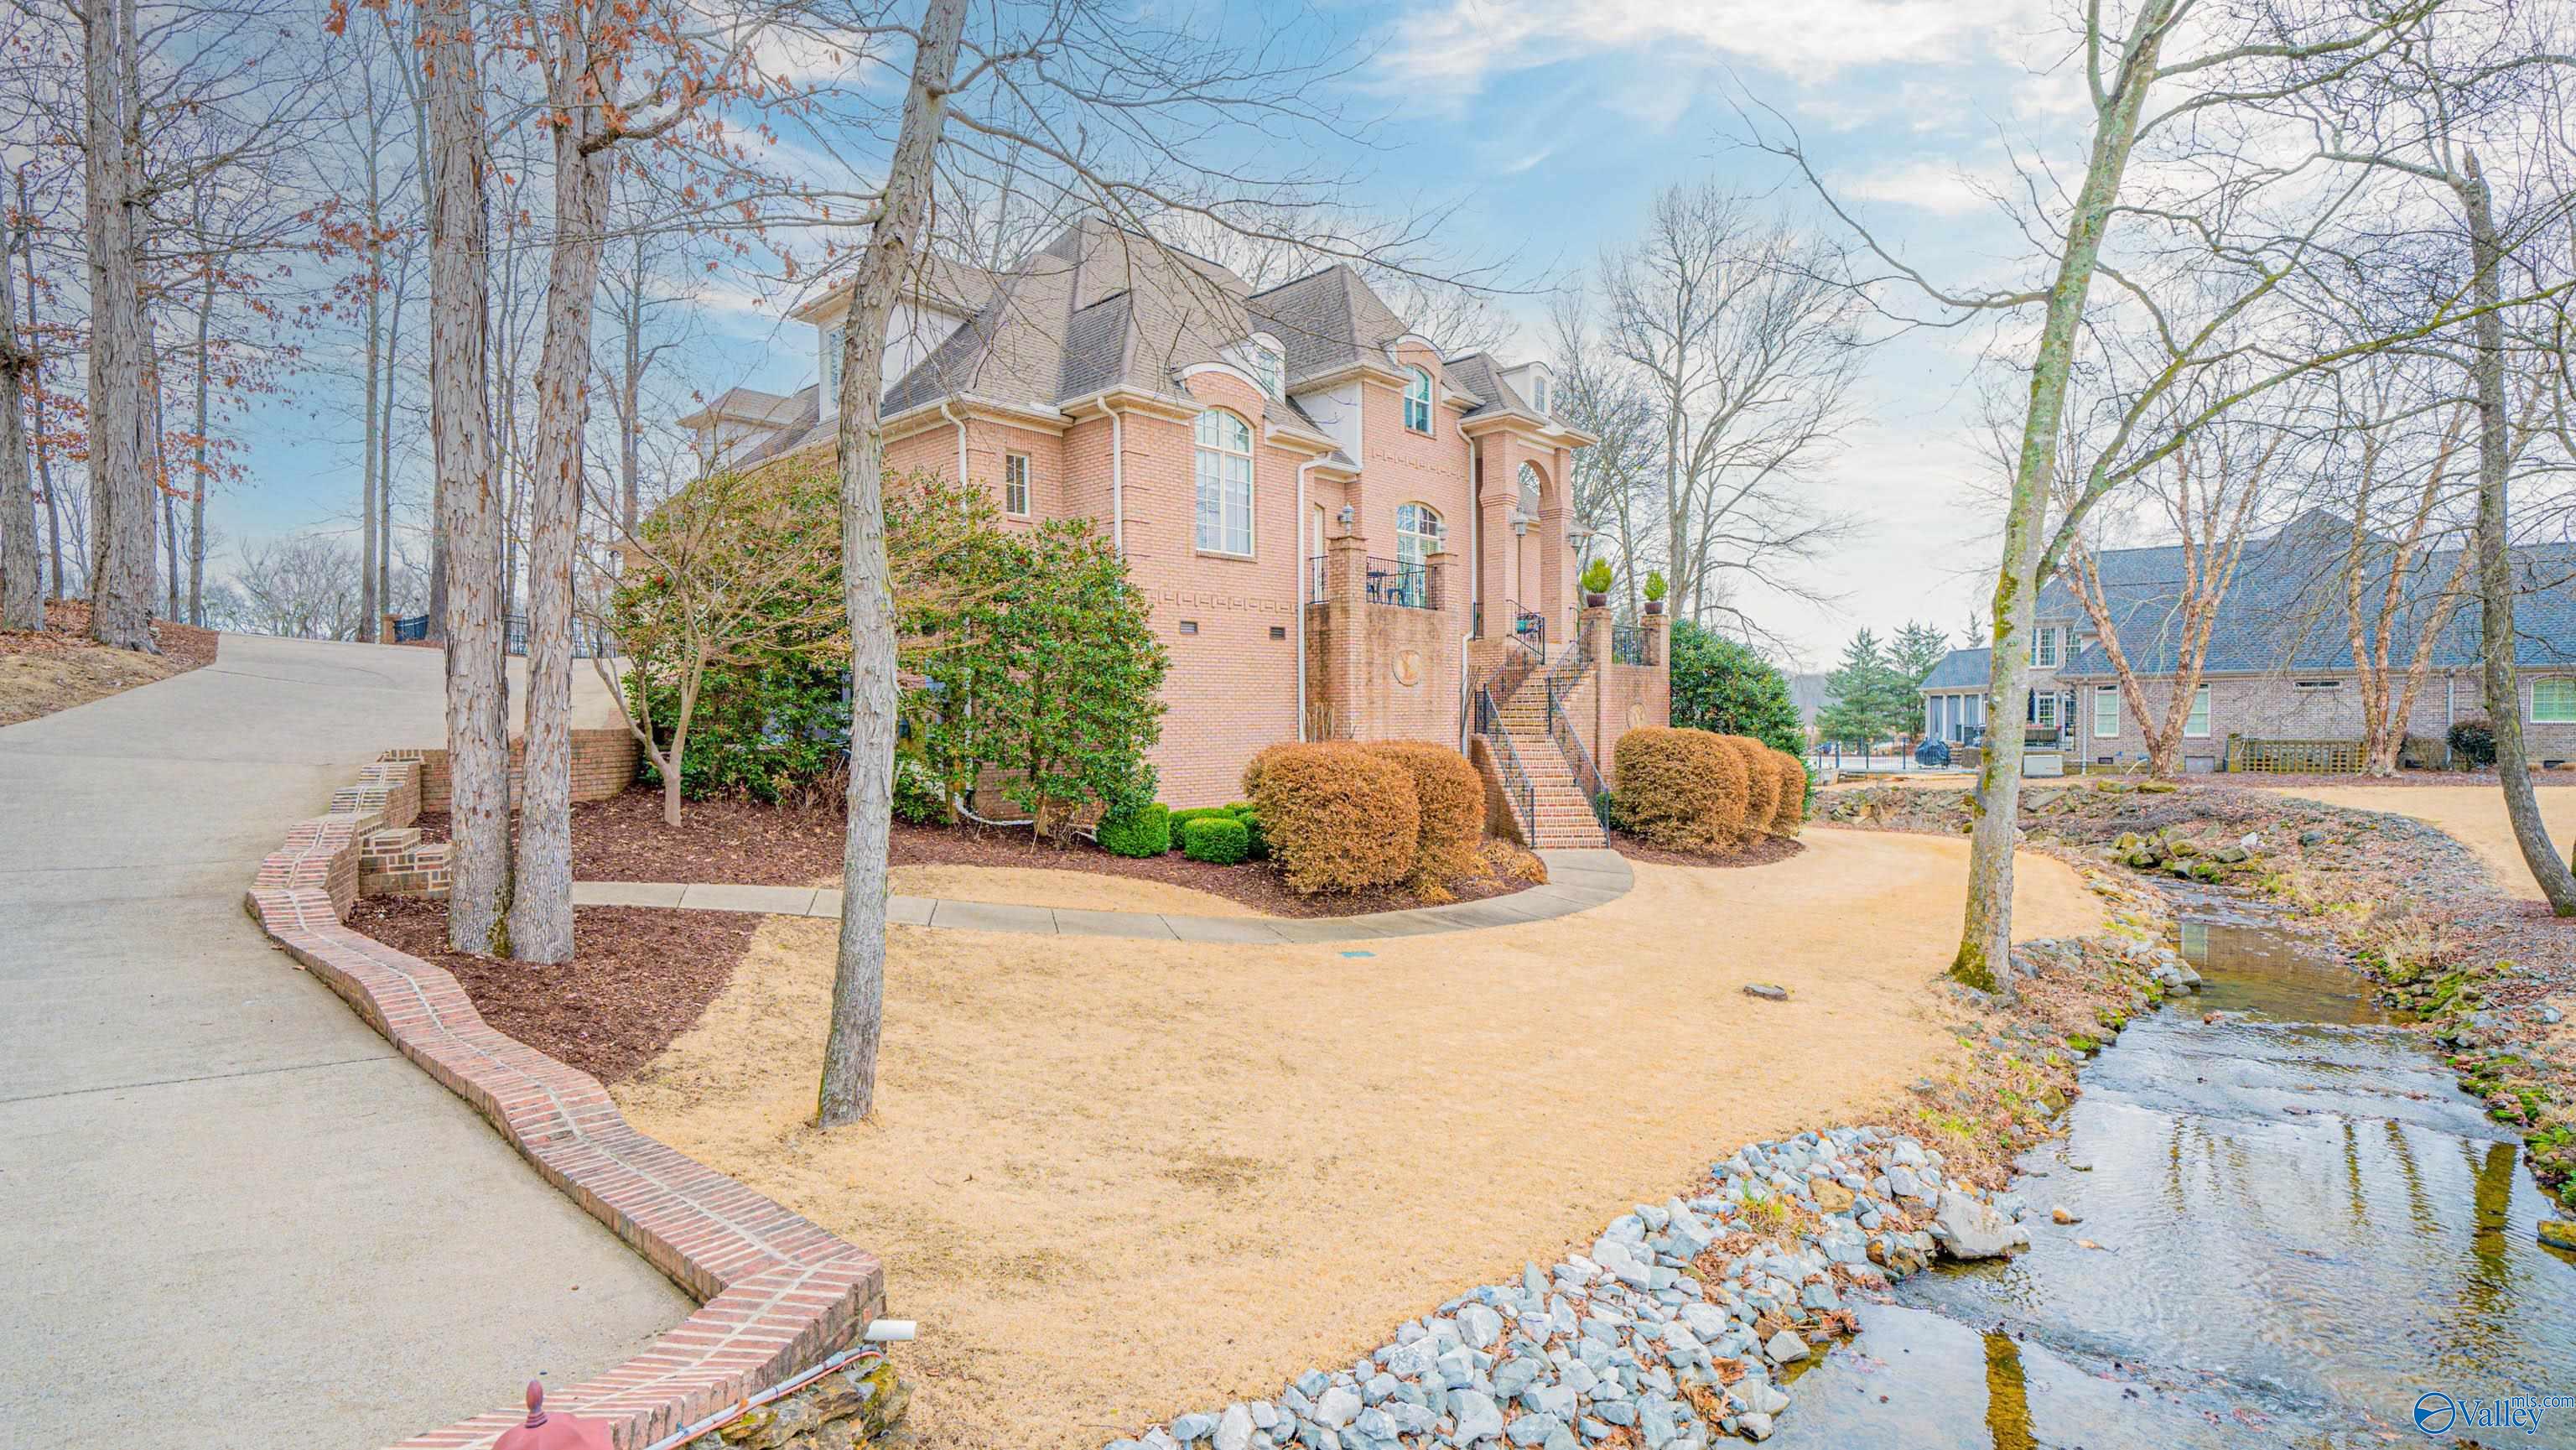 Property: 23291 Founders Circle,Athens, AL